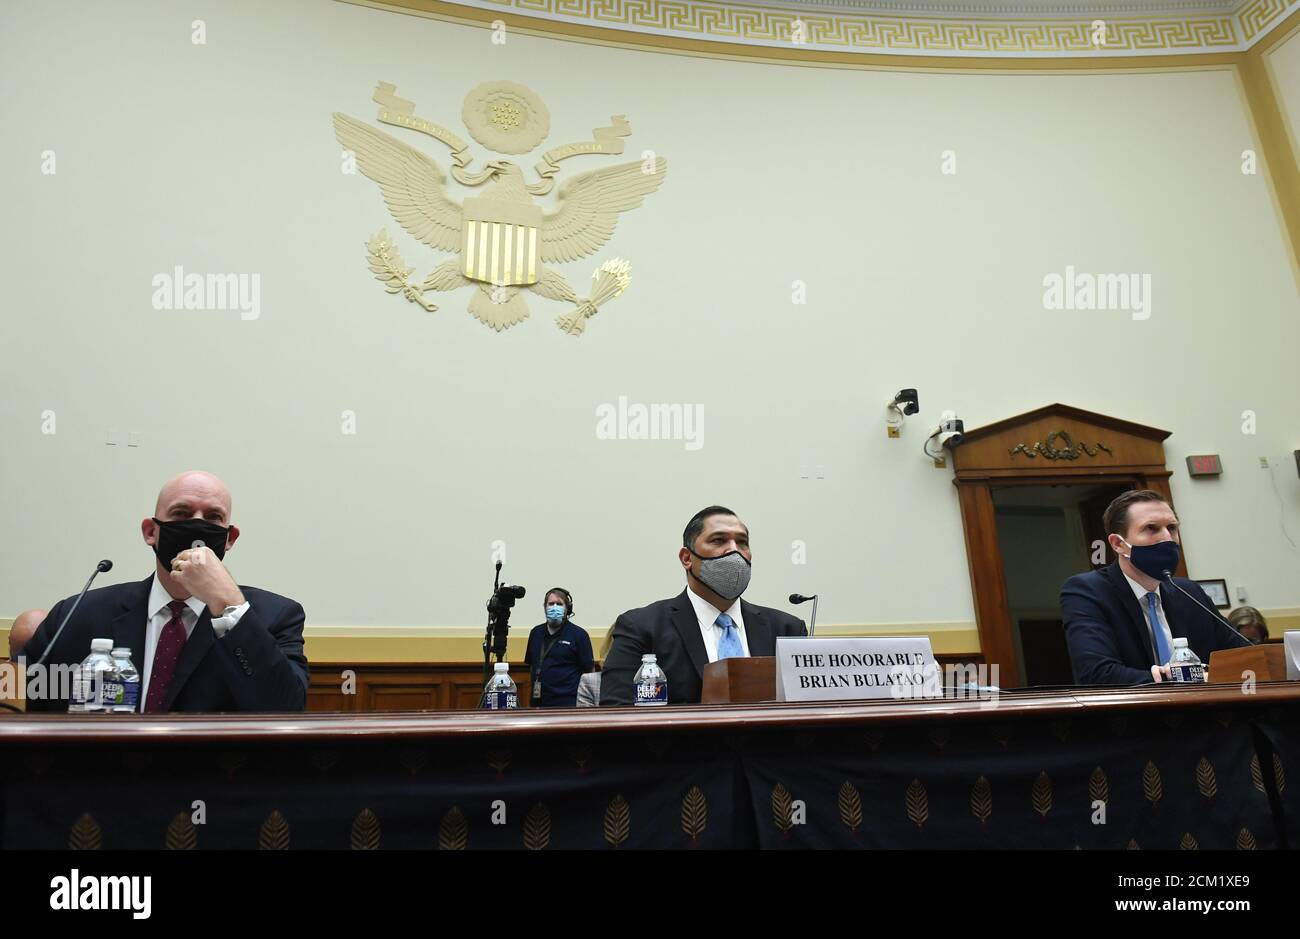 R. Clarke Cooper (L), Assistant Secretary of State for Political-Military Affairs, Brian Bulatao (C), Under Secretary of State for Management, and Marik String, Acting Legal Adviser for the State Department, testify before a House Committee on Foreign Affairs hearing looking into the firing of State Department Inspector General Steven Linick, on Capitol Hill in Washington, D.C. on Wednesday, September 16, 2020.Credit: Kevin Dietsch / Pool via CNP /MediaPunch Stock Photo